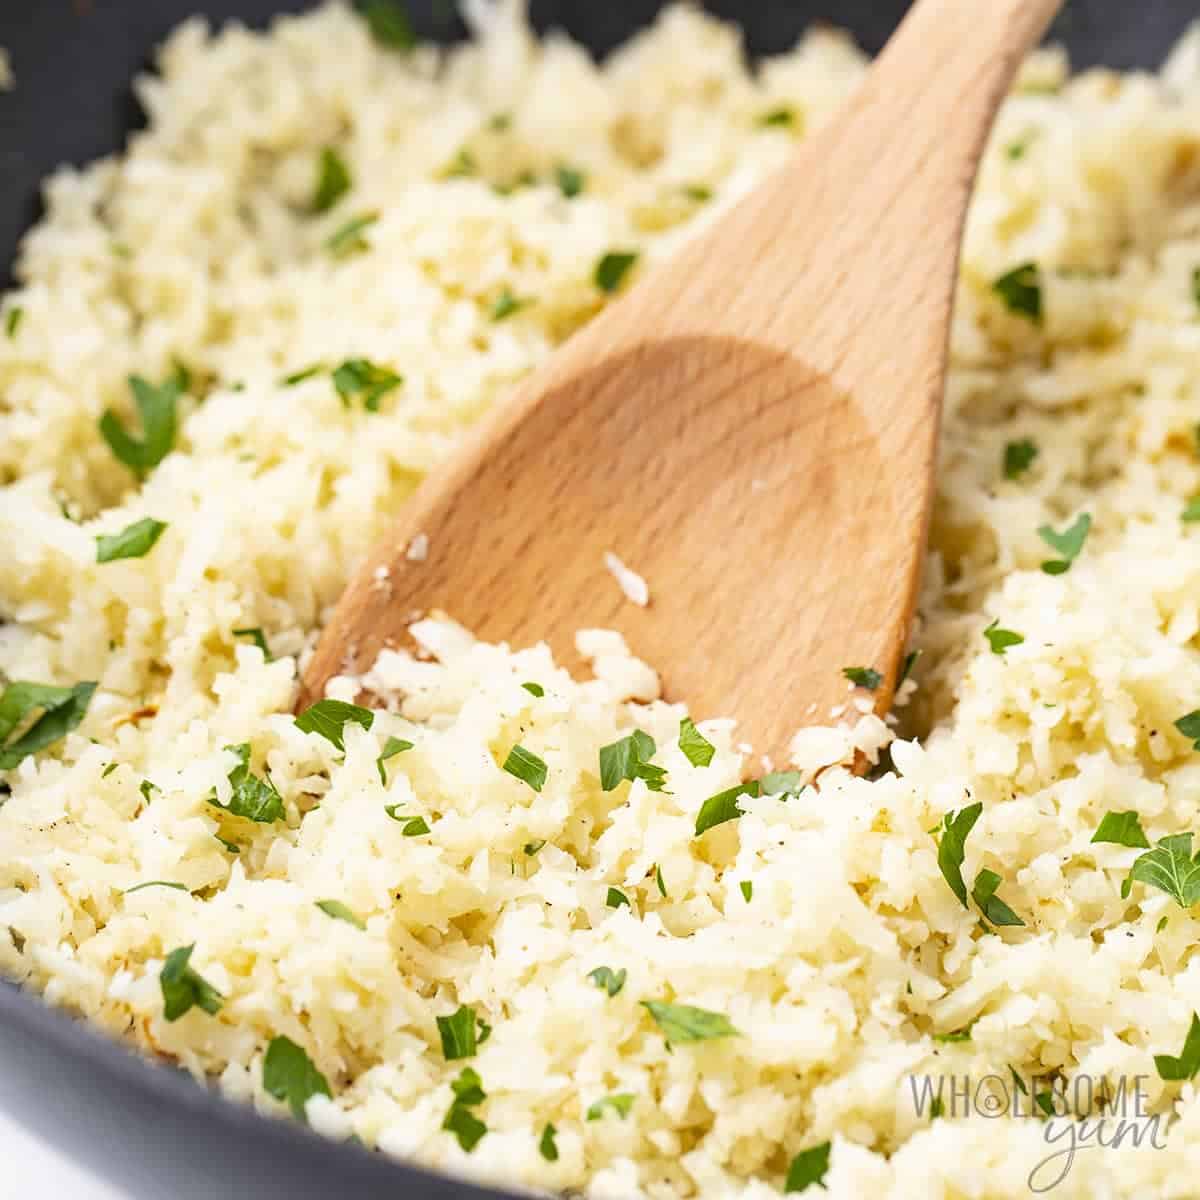 Cauliflower rice close up with wooden spoon